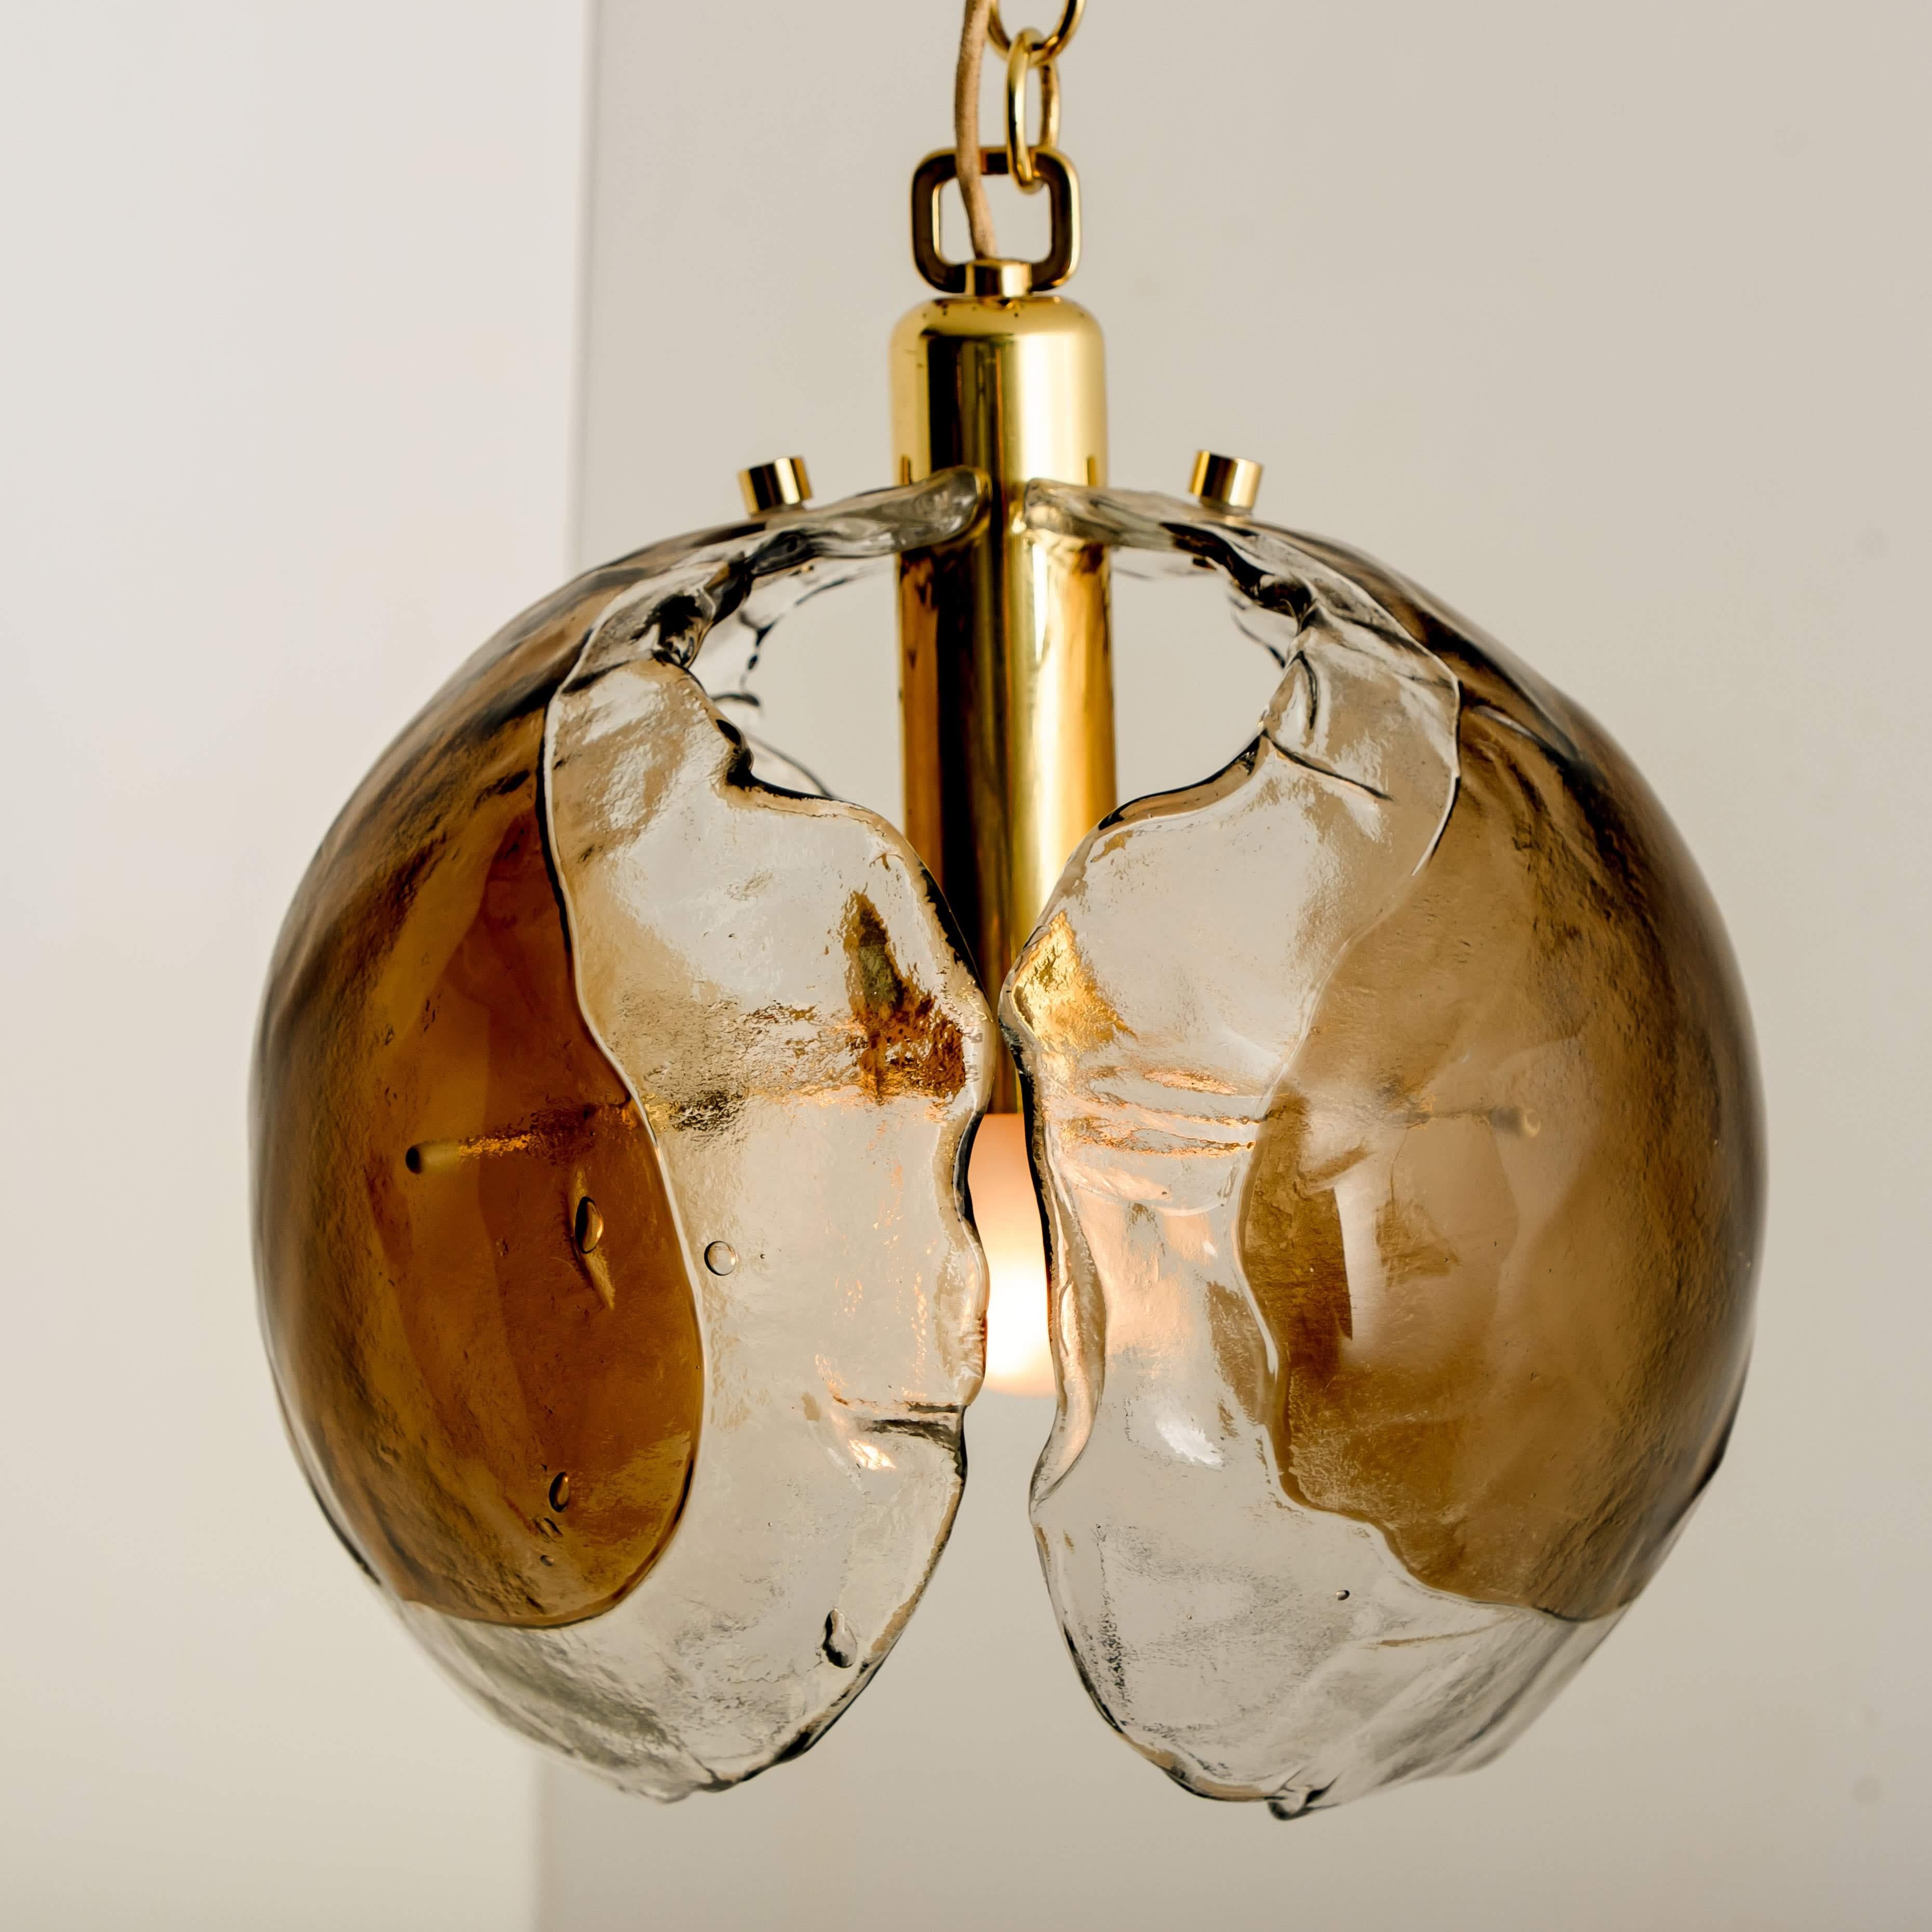 1 of the 3 Kalmar Chandelier Pendant Lights, Smoked Glass and Brass, 1970s For Sale 1